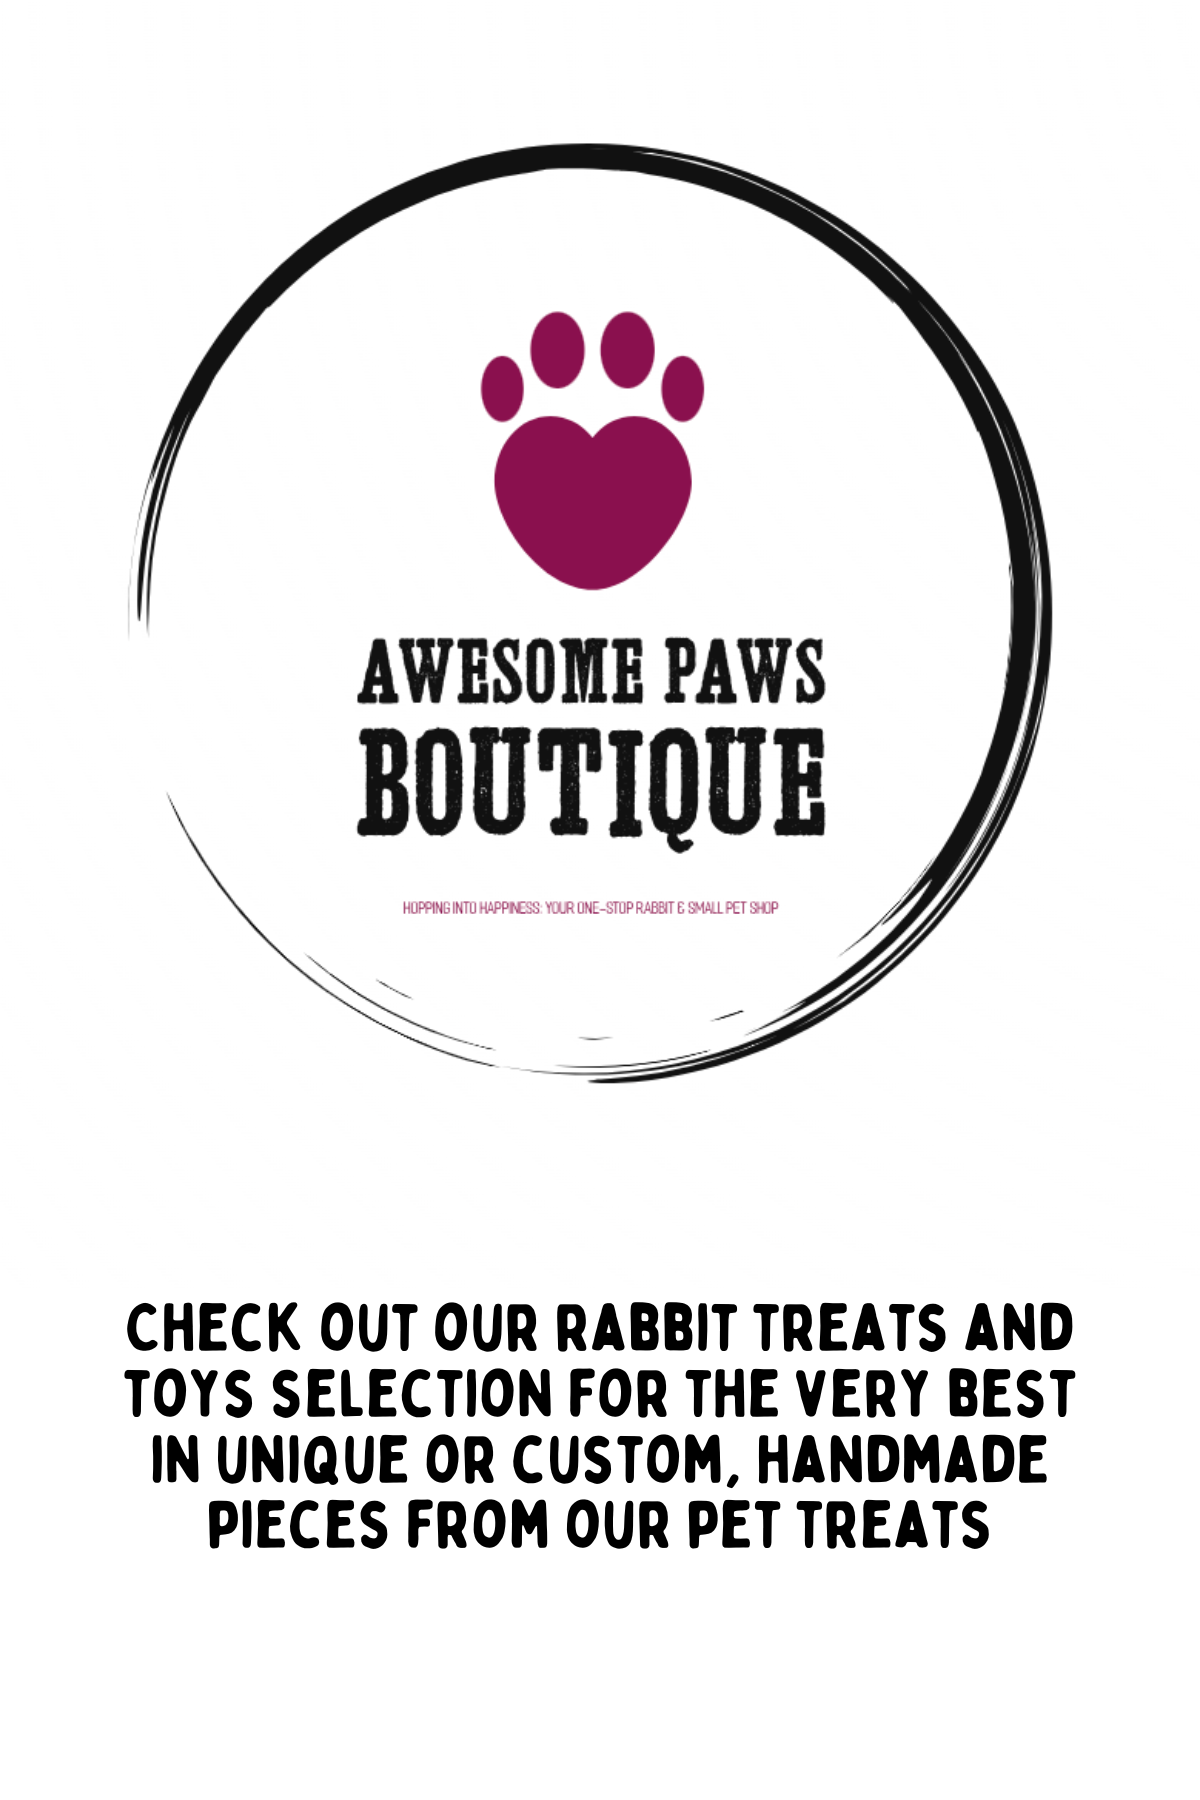 Introducing Awesome Paws Boutique: Elevating Small Pet Treats and Toys for Rabbits, Hamsters, Chinchillas, Guinea Pig and Other Small Pets